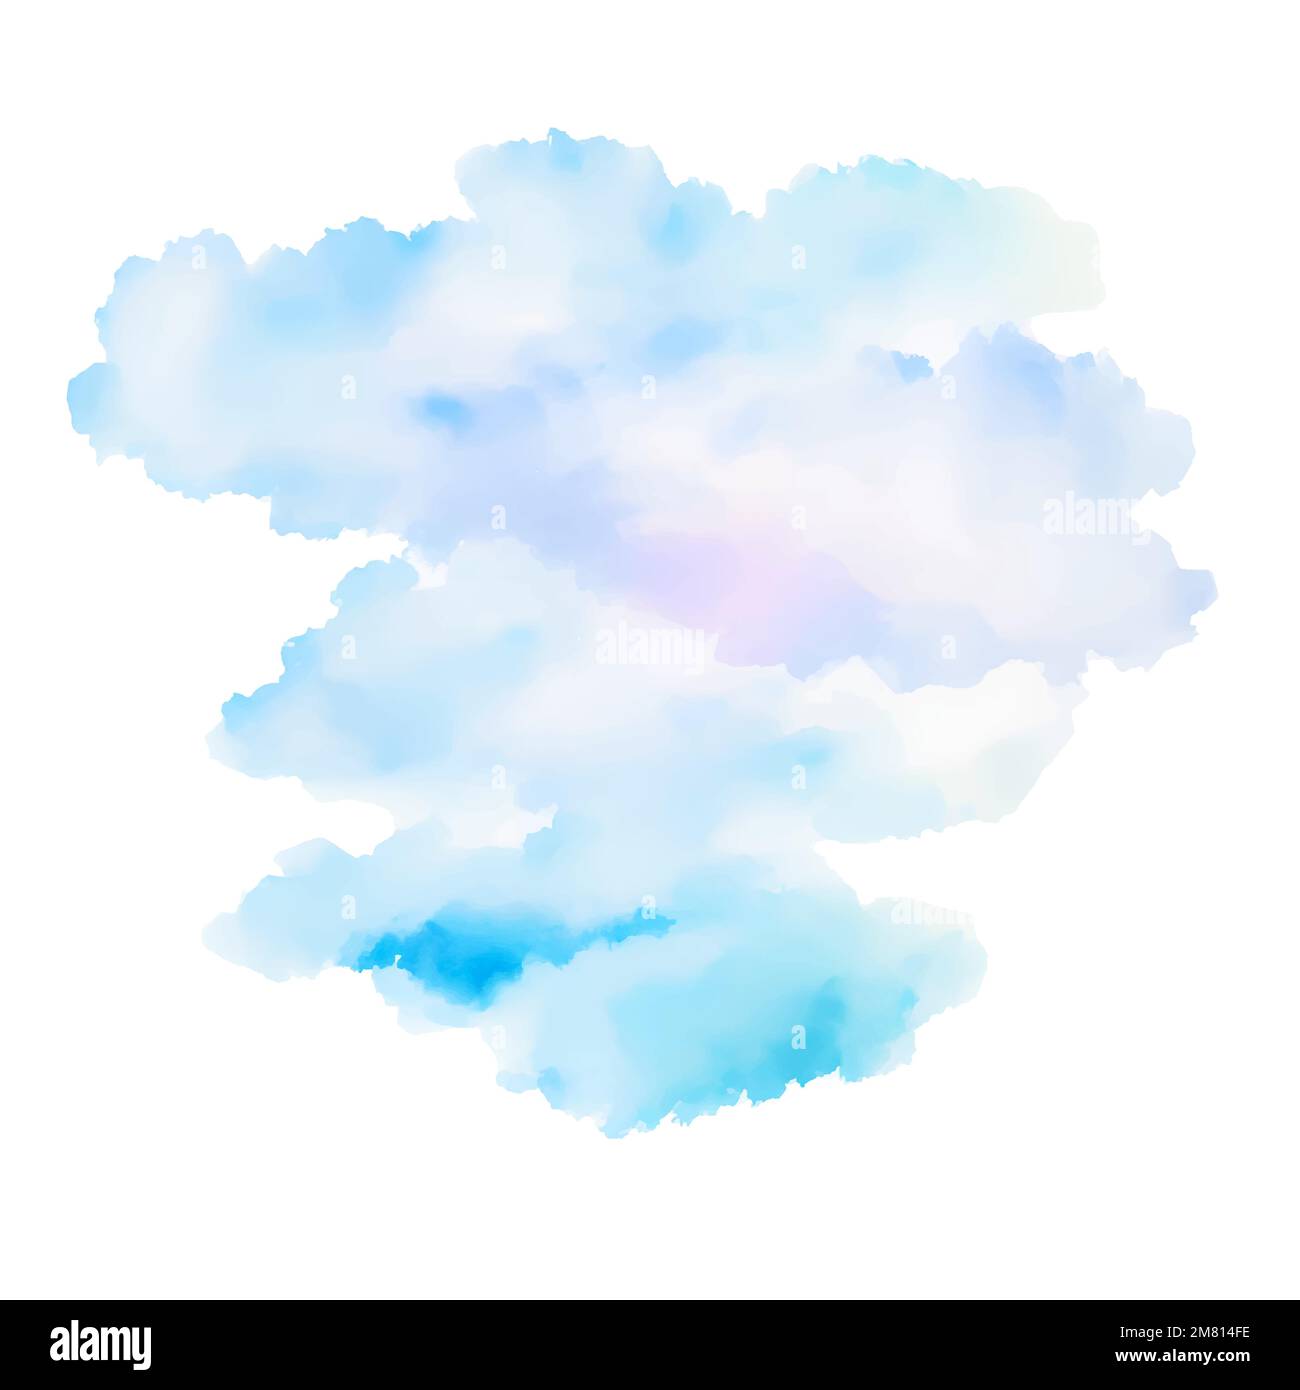 Handmade illustration of blue clouds, sky watercolor, light abstract splash on white  background, vector watercolor clouds. Stock Vector